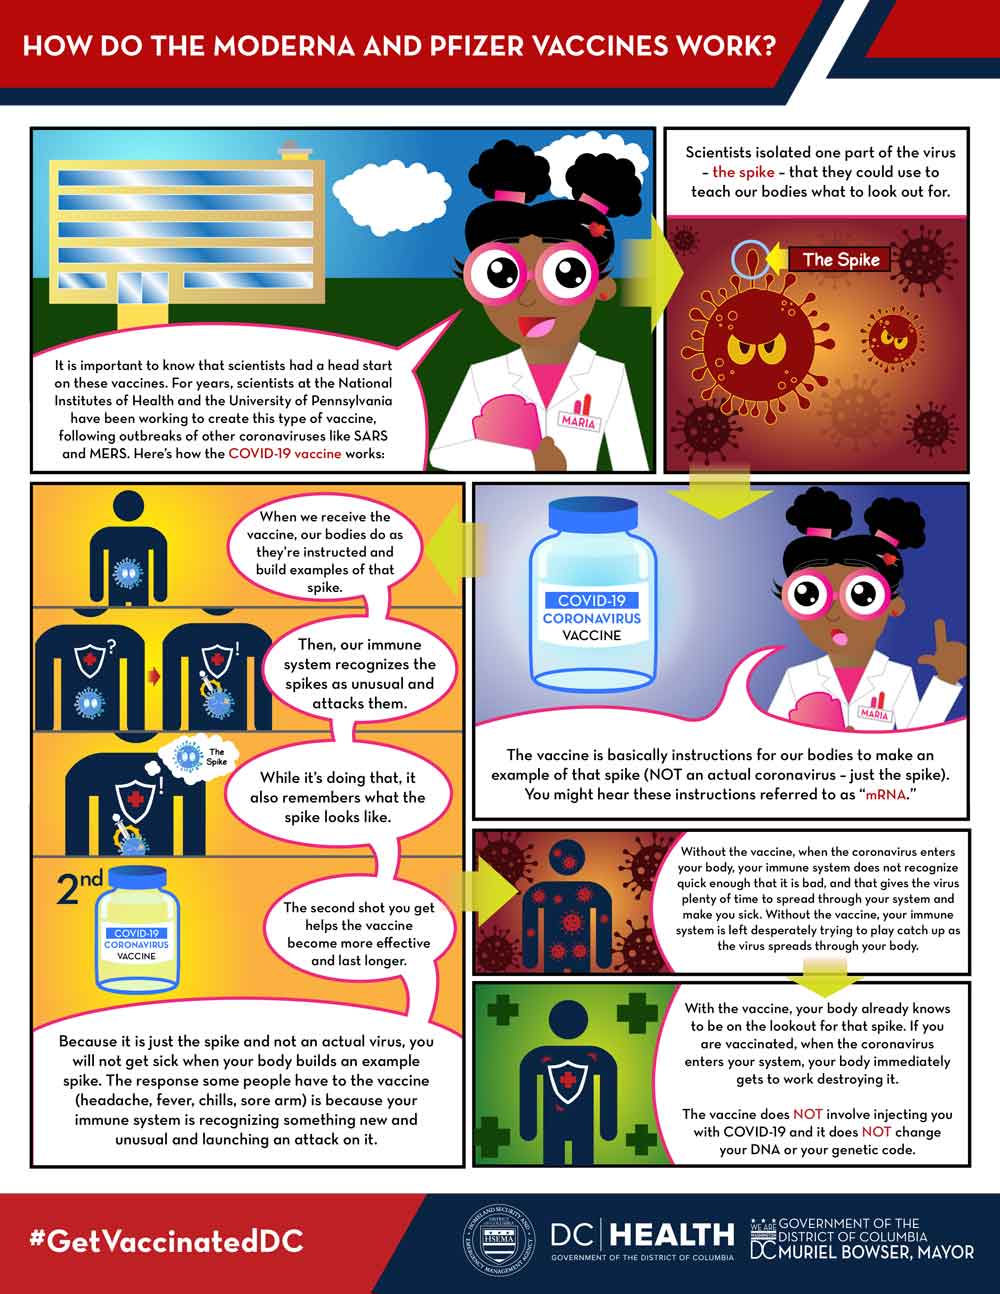 Image showing multiple flyers describing vaccine safety. "Protect Yourself: Get the COVID-19 Vaccine," "How does the COVID-19 Vaccine Work?" and "It's safe, effective and free!"